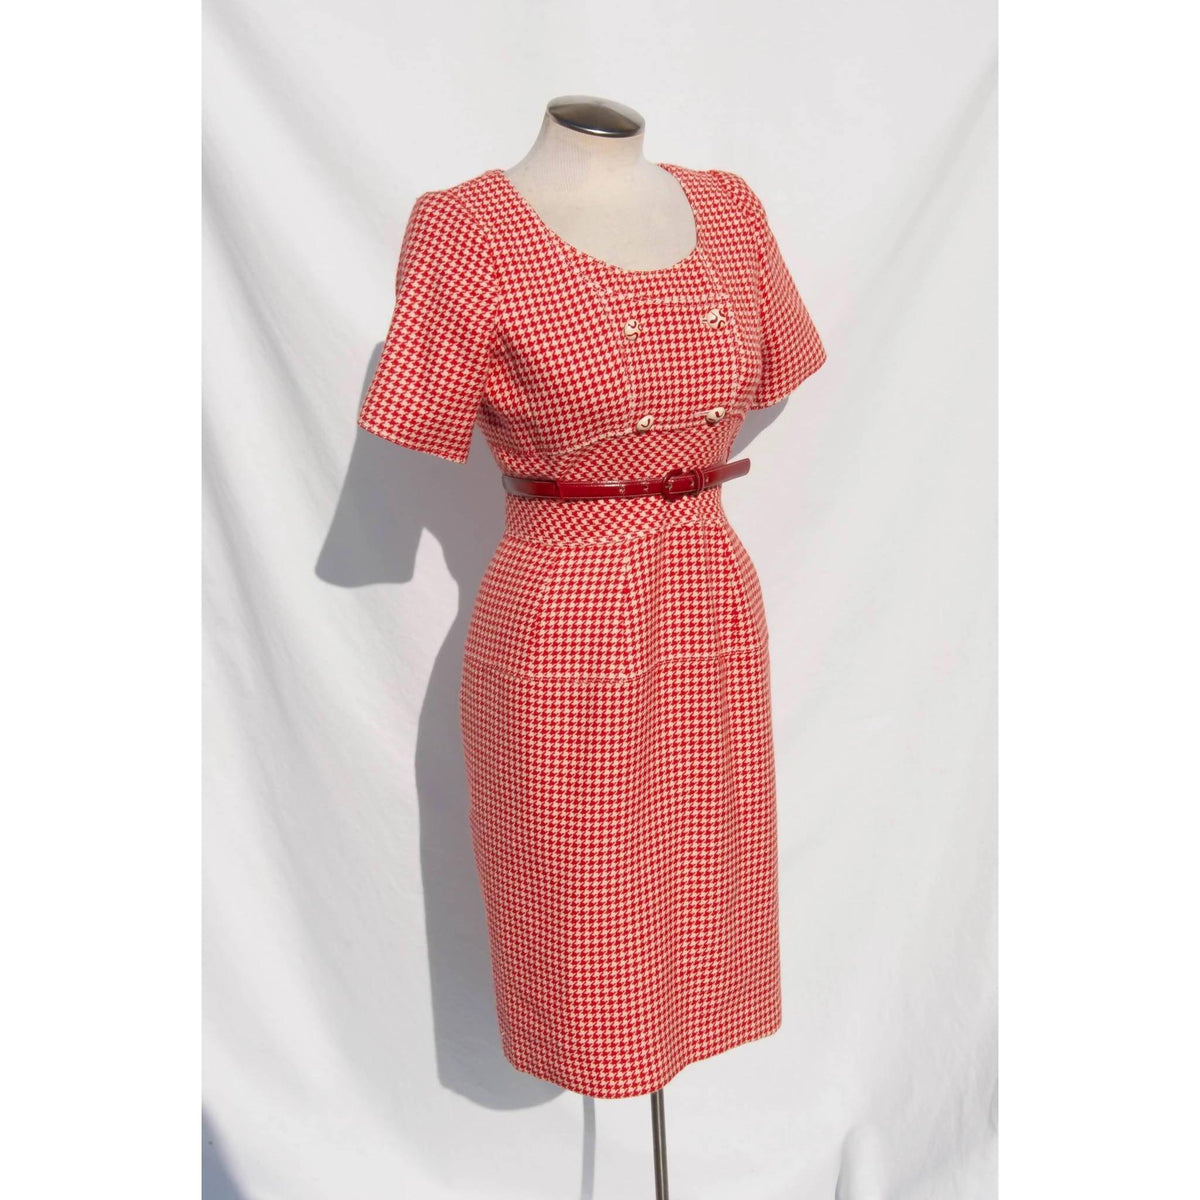 EMANUEL UNGARO Red & White Houndstooth Wool Dress | Size M/L - theREMODA